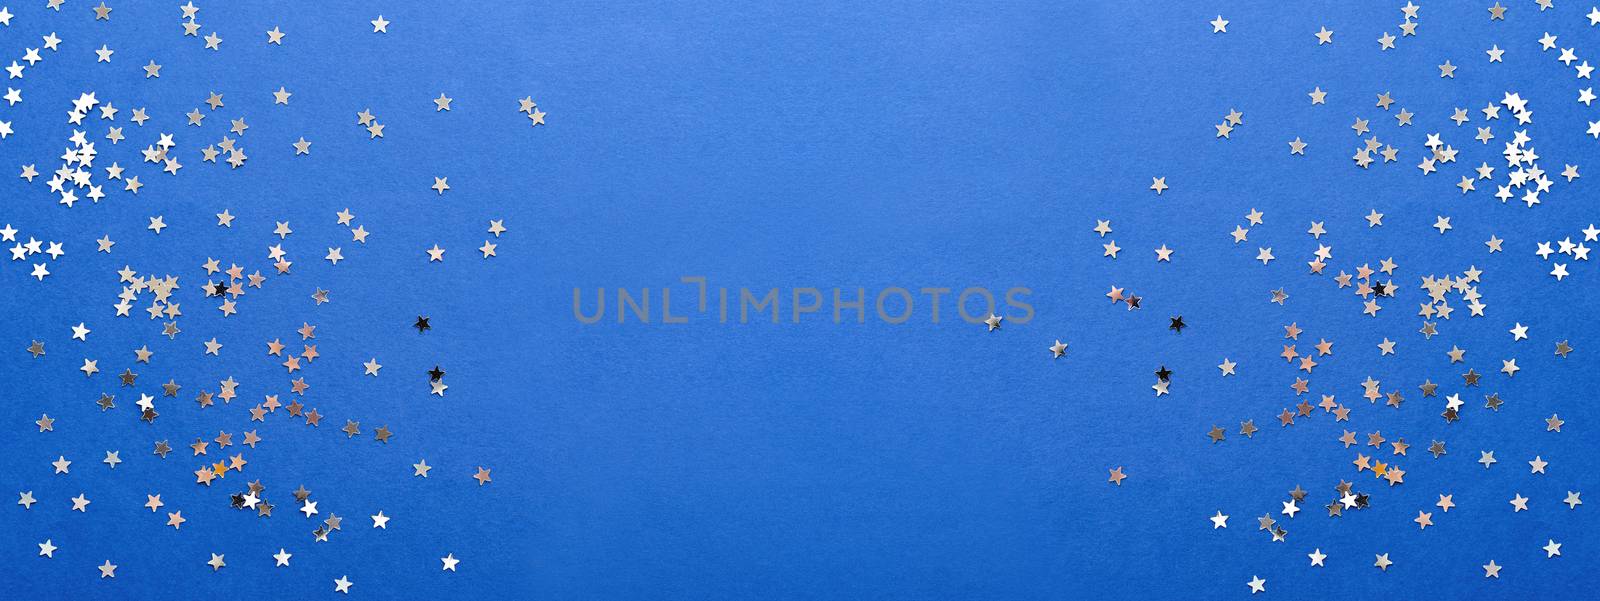 Holiday background with silver star confetti on blue background. Good backdrop for Christmas and New Year cards.